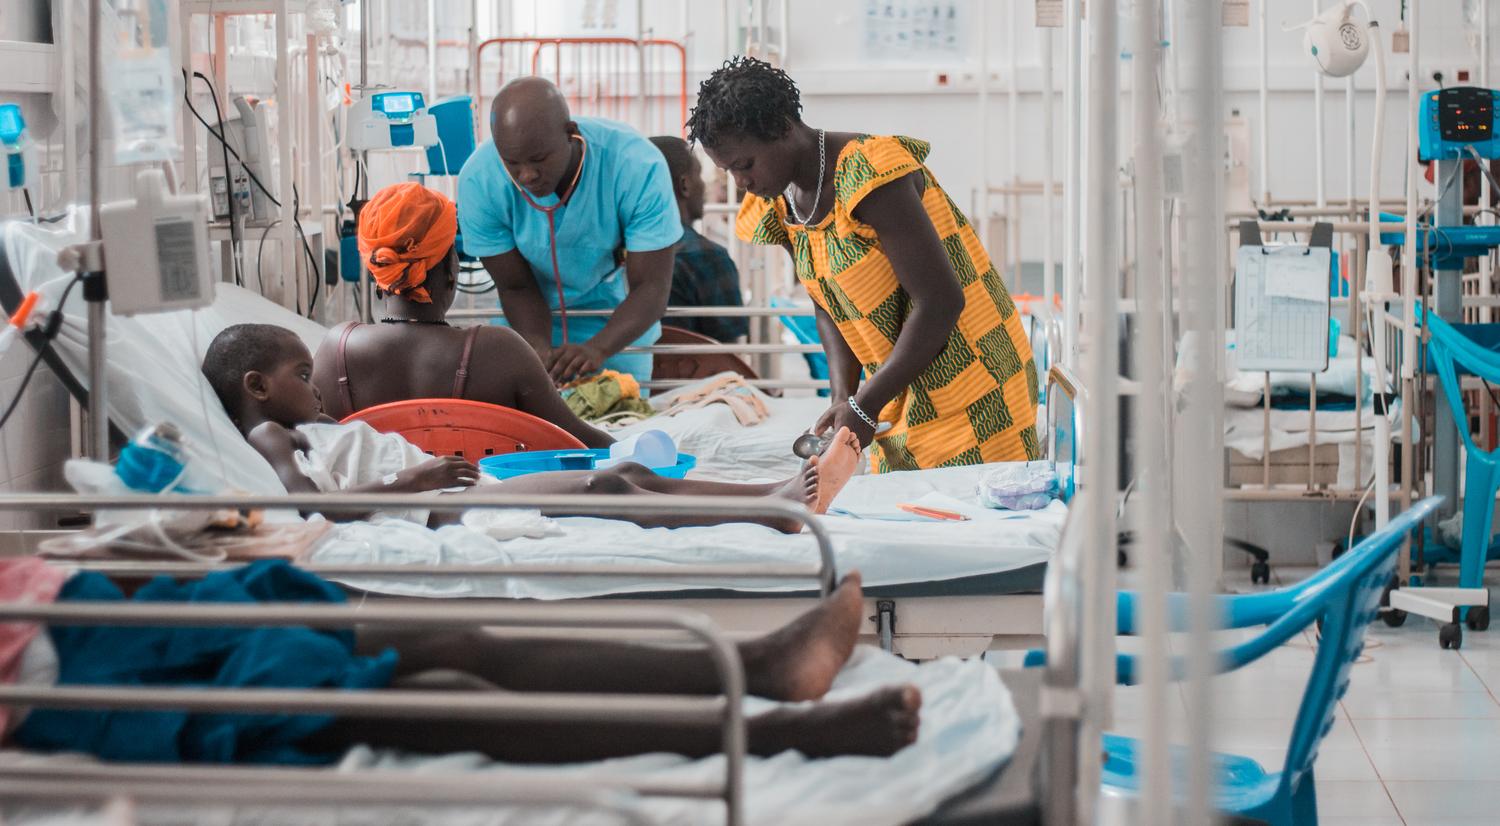 Medical staff with a young patient in the Simao Mendes national hospital in Bissau, the capital of Guinea Bissau, where MSF runs an emergency paediatric project. August 2018. 